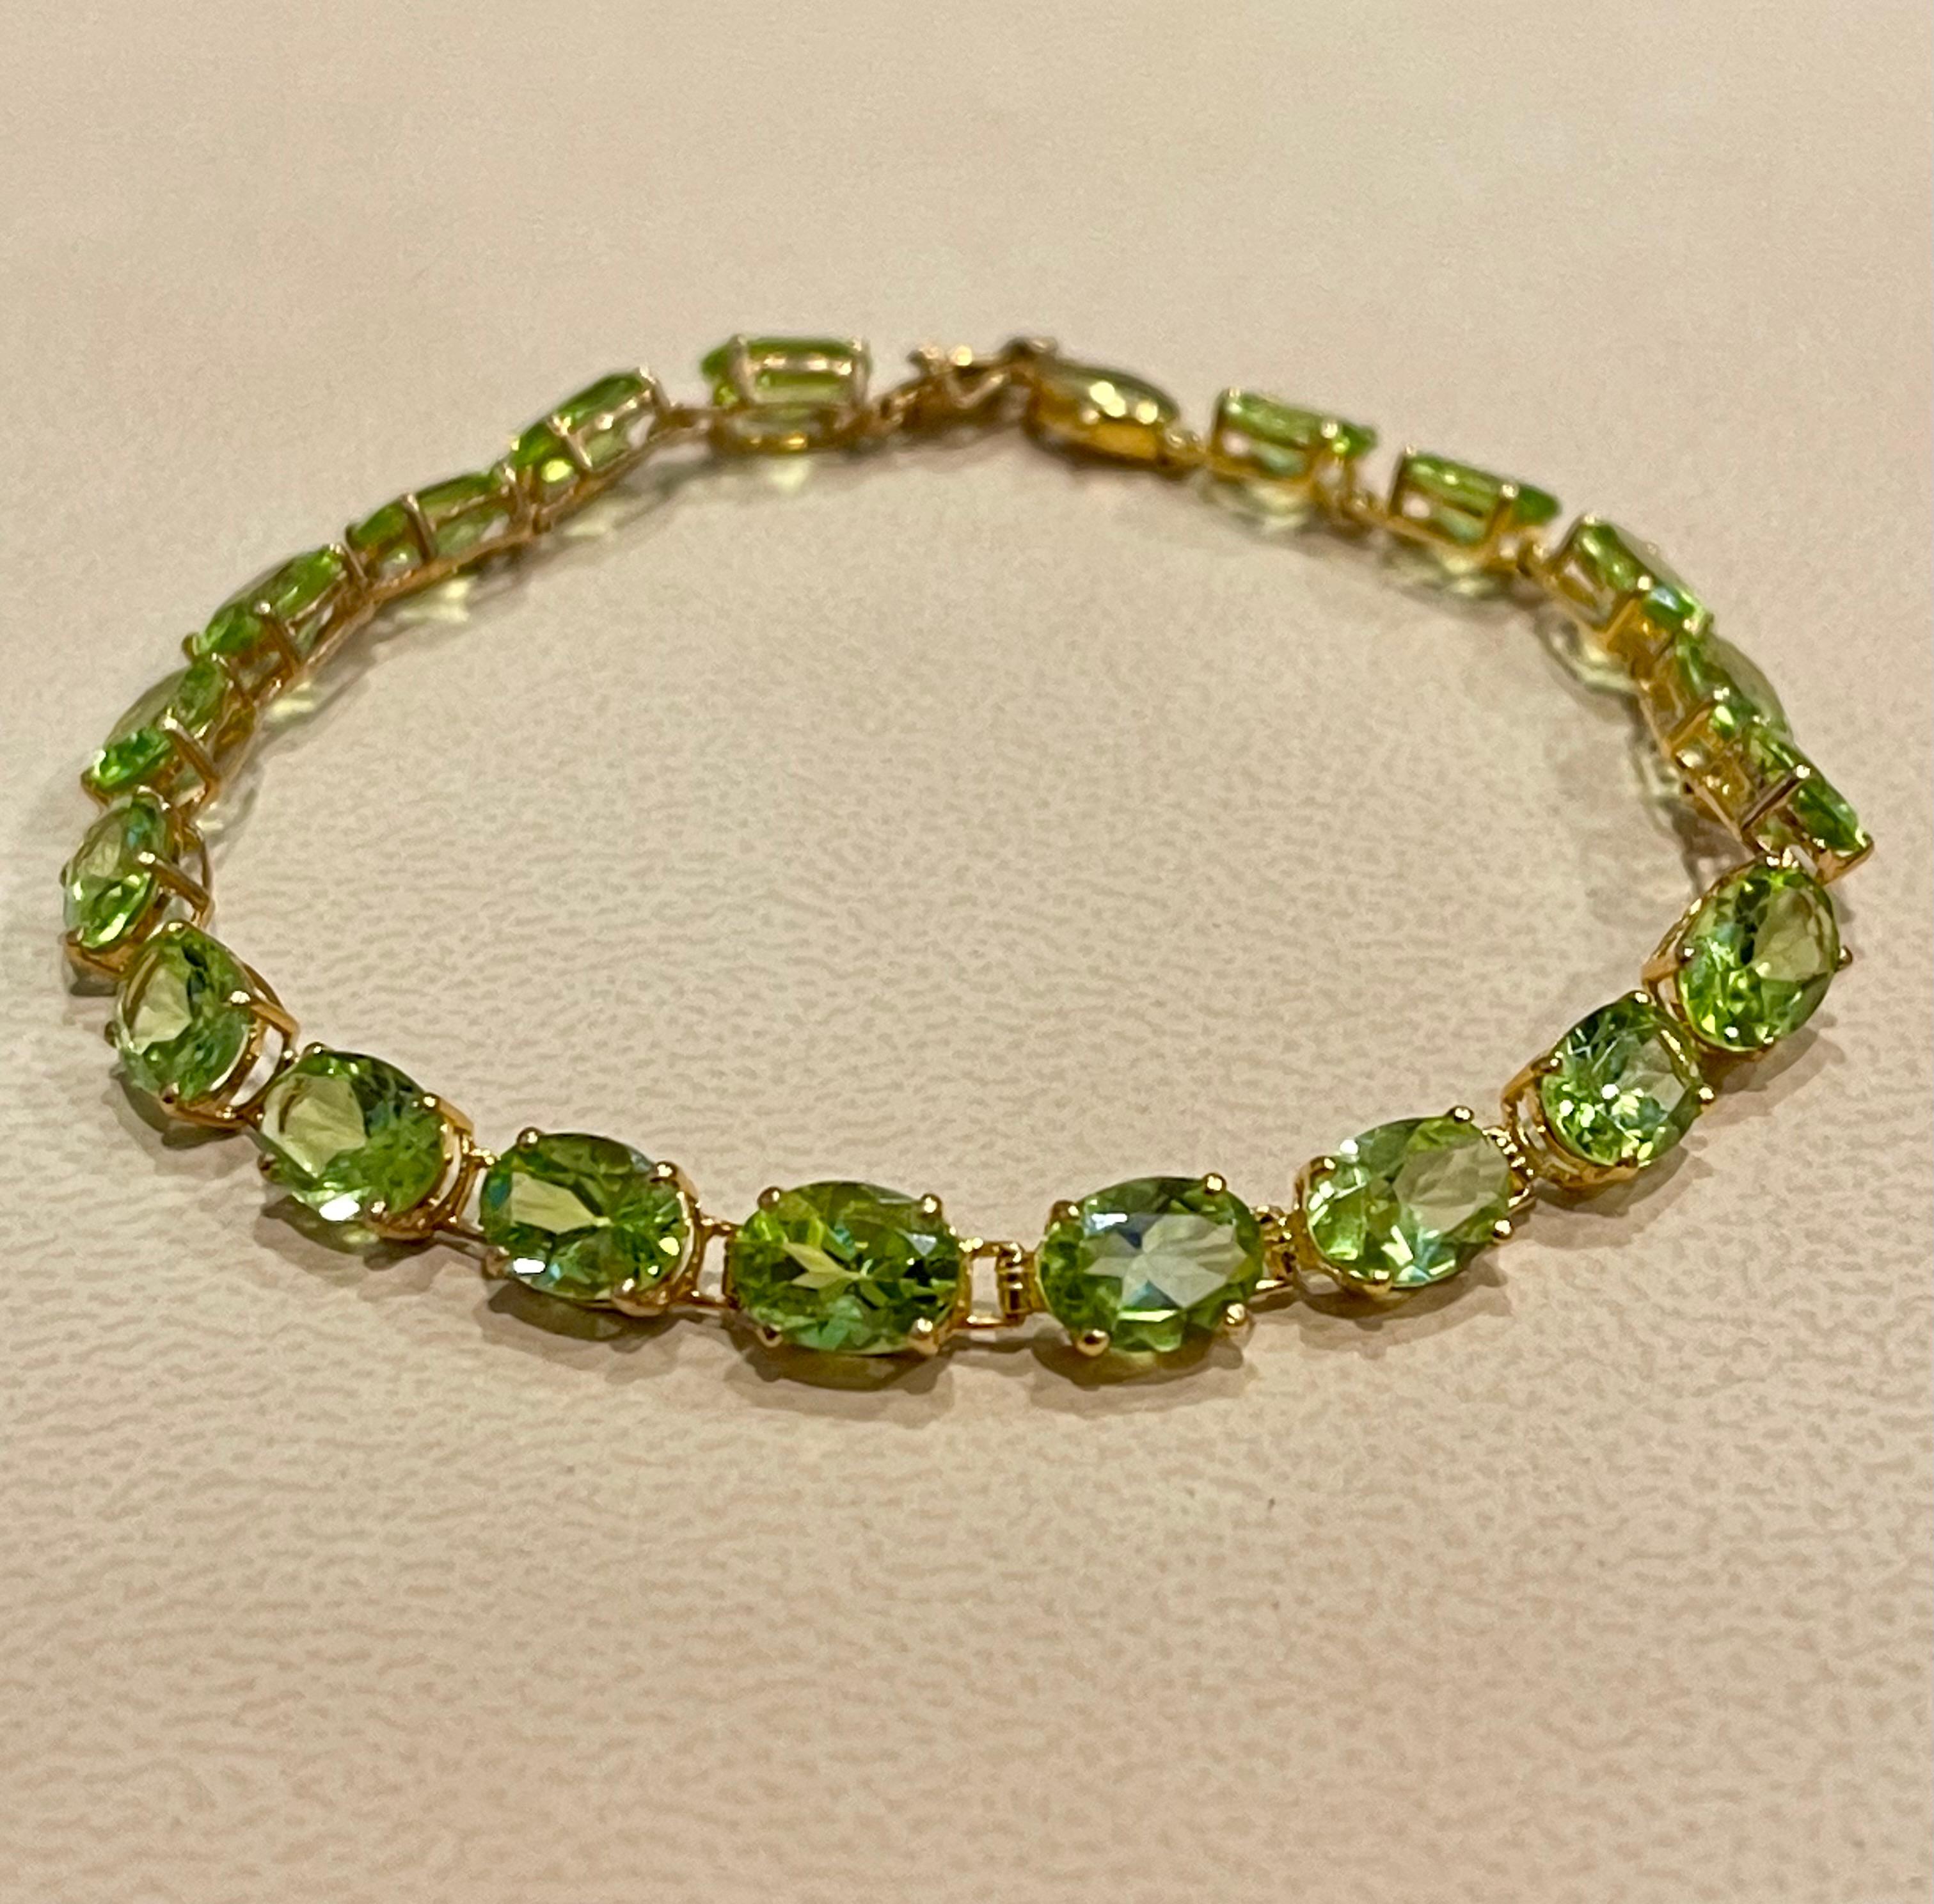  This exceptionally affordable Tennis  bracelet has  19 stones of Pear shape Peridot
Beautiful colors , very Vibrant
Size of the stone is approximately 7X5 mm
Each Peridot is spaced by a small gold link

Total weight of these Peridot is